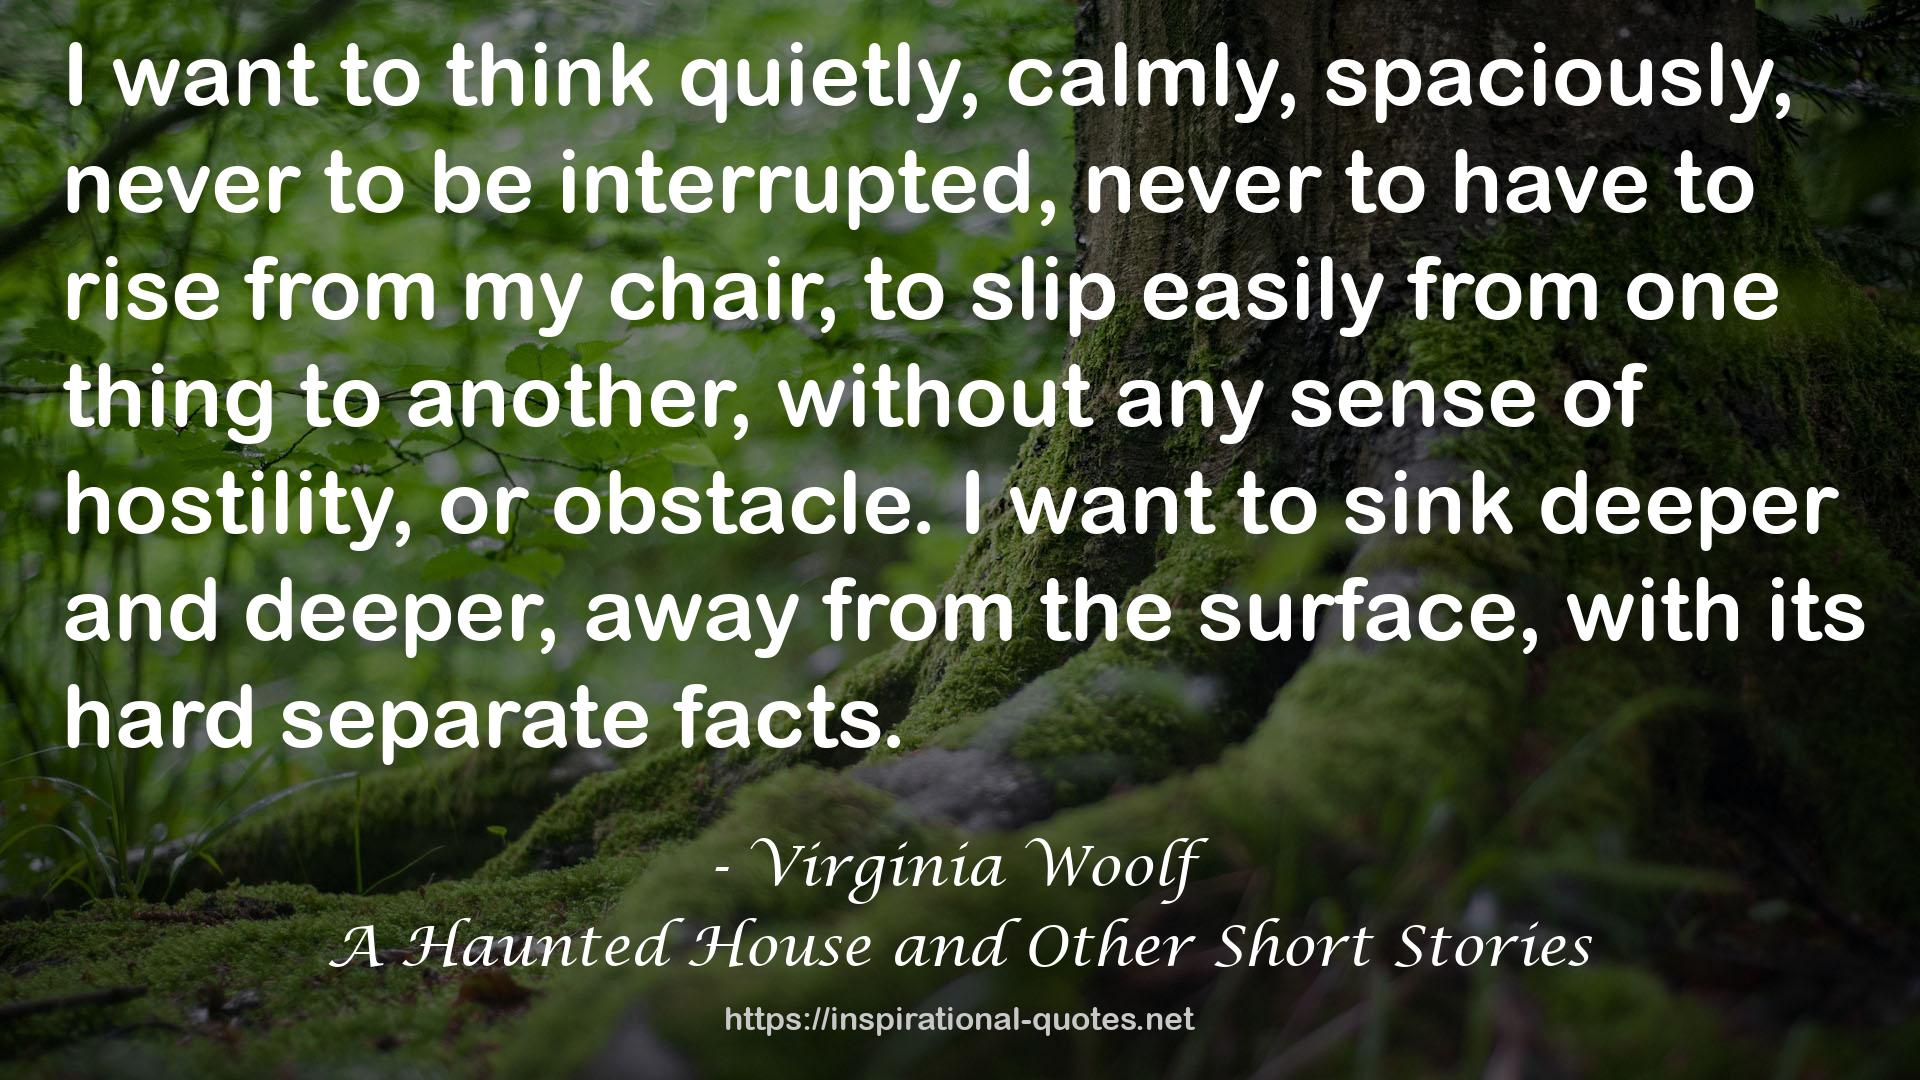 A Haunted House and Other Short Stories QUOTES